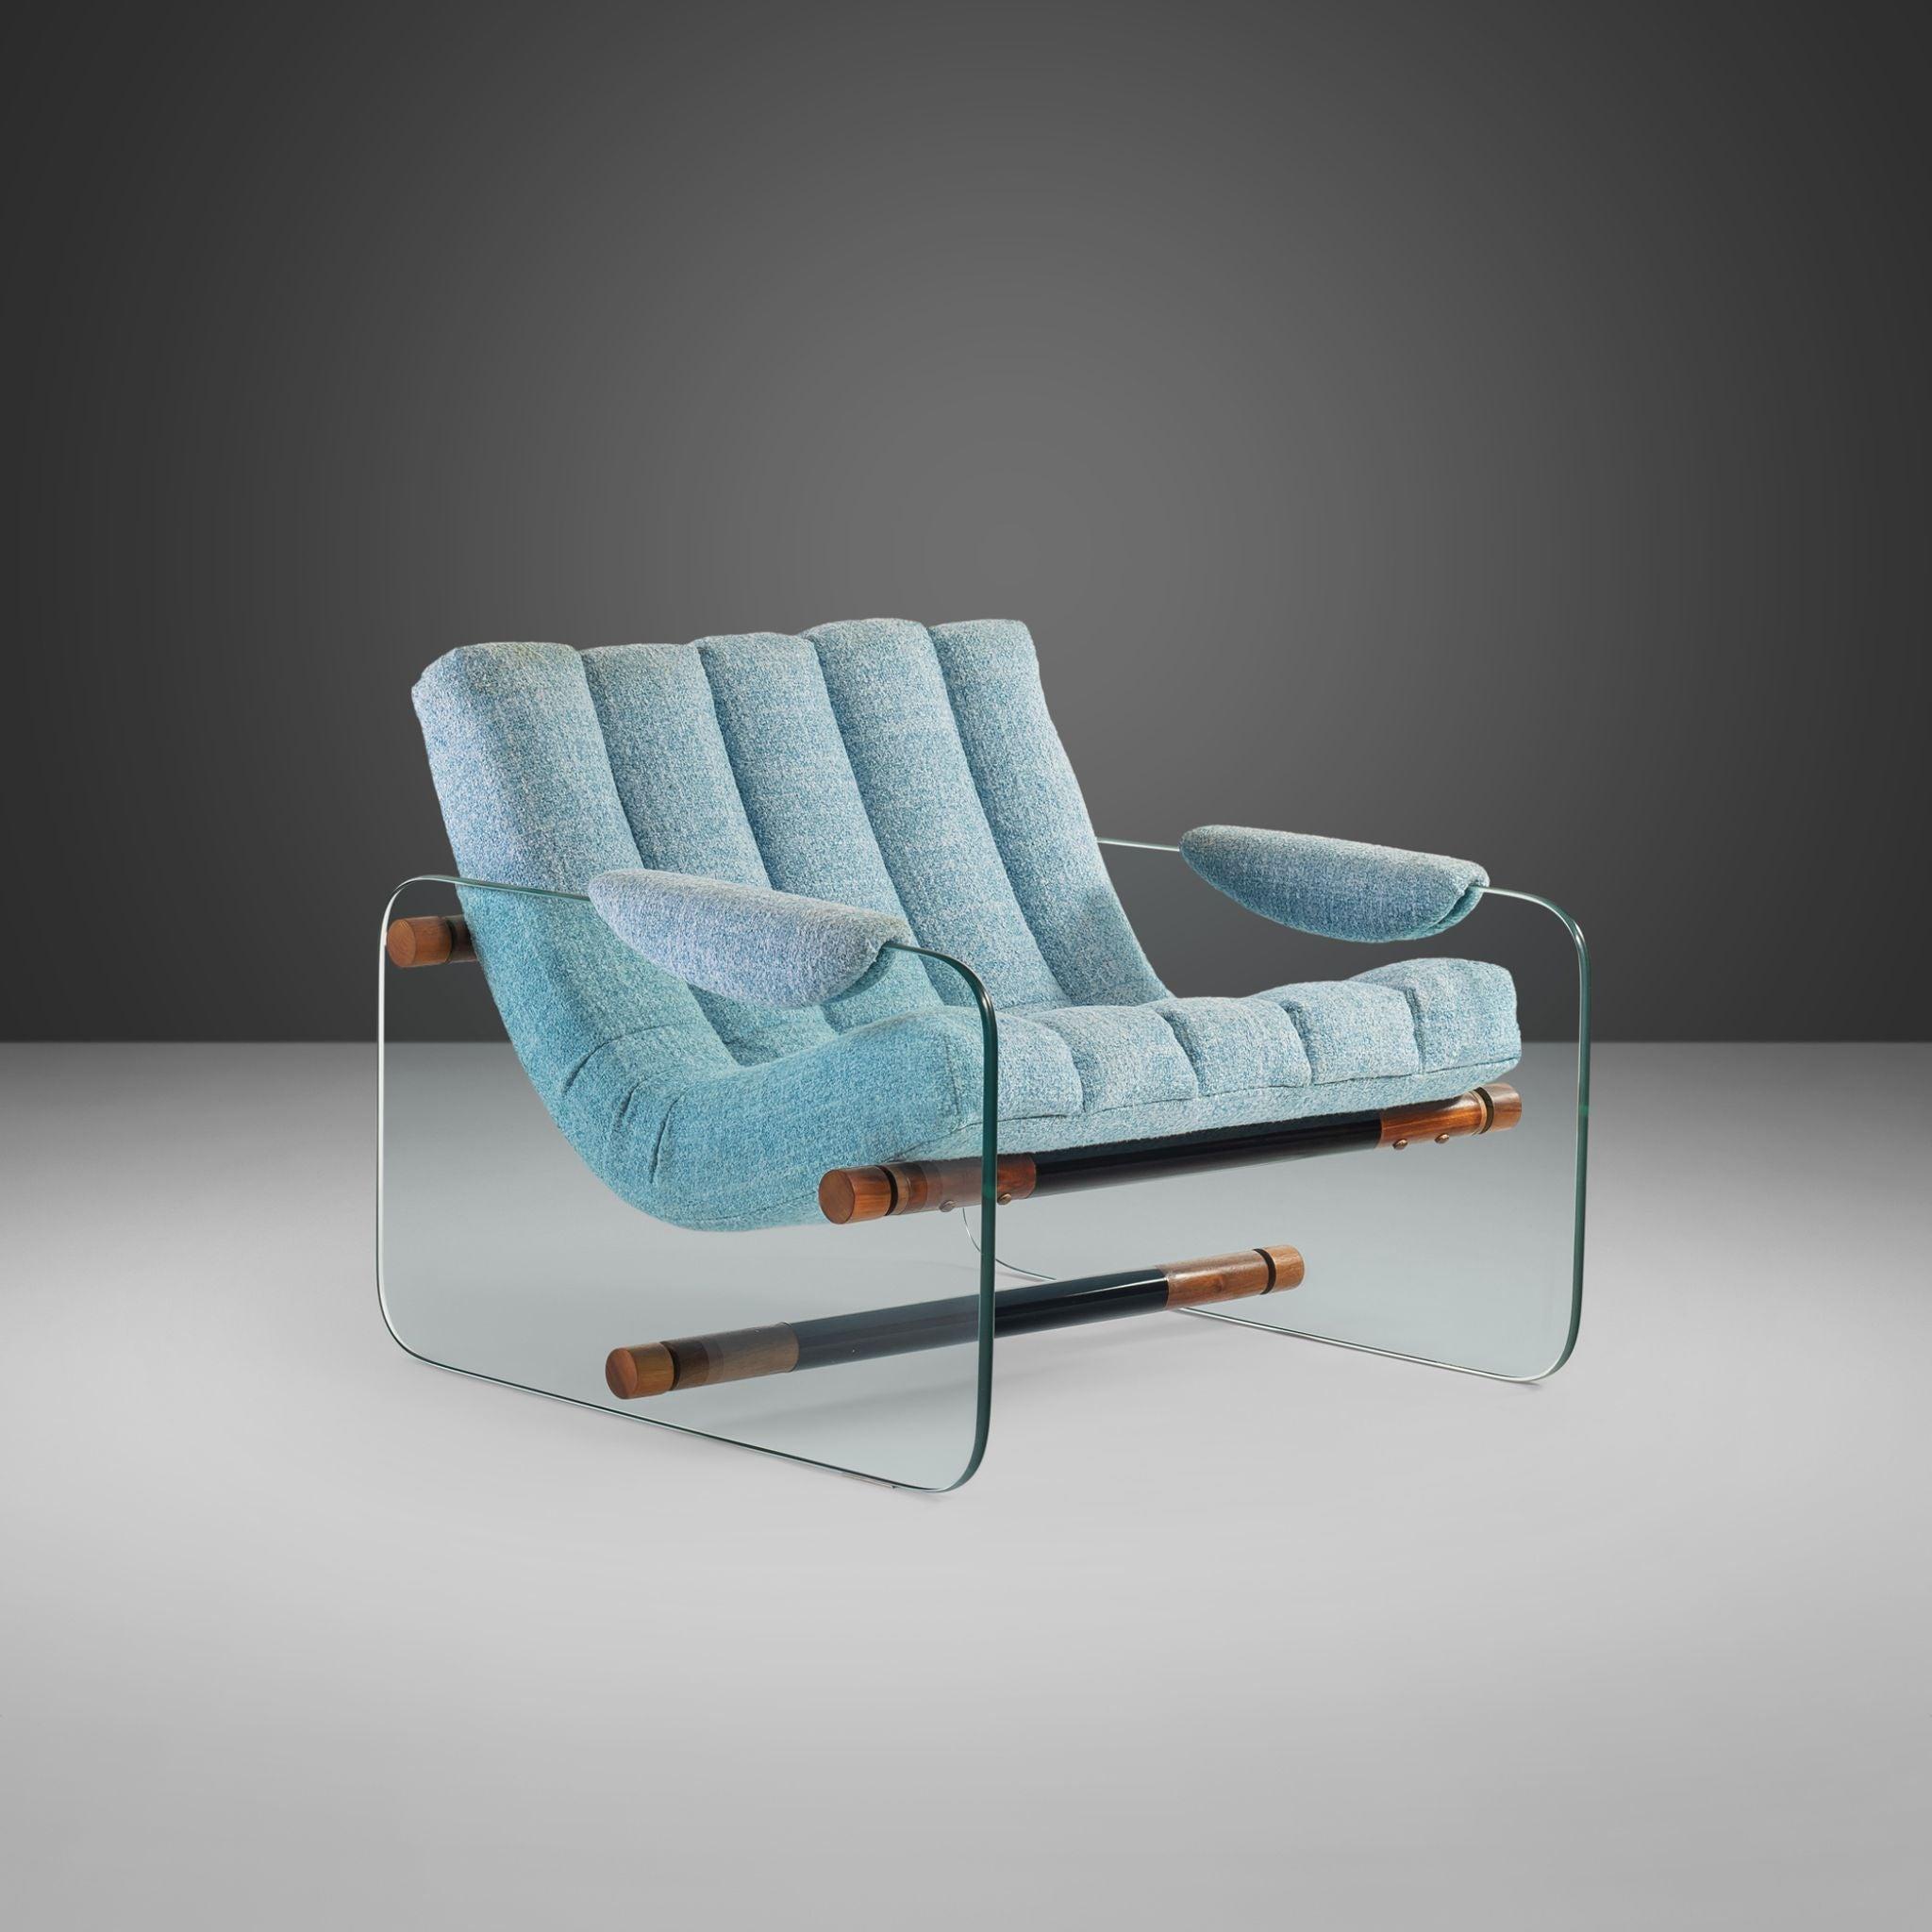 American Glass Lounge Chair After Fabio Lenci by Adrian Pearsall Craft Associates, 1970's